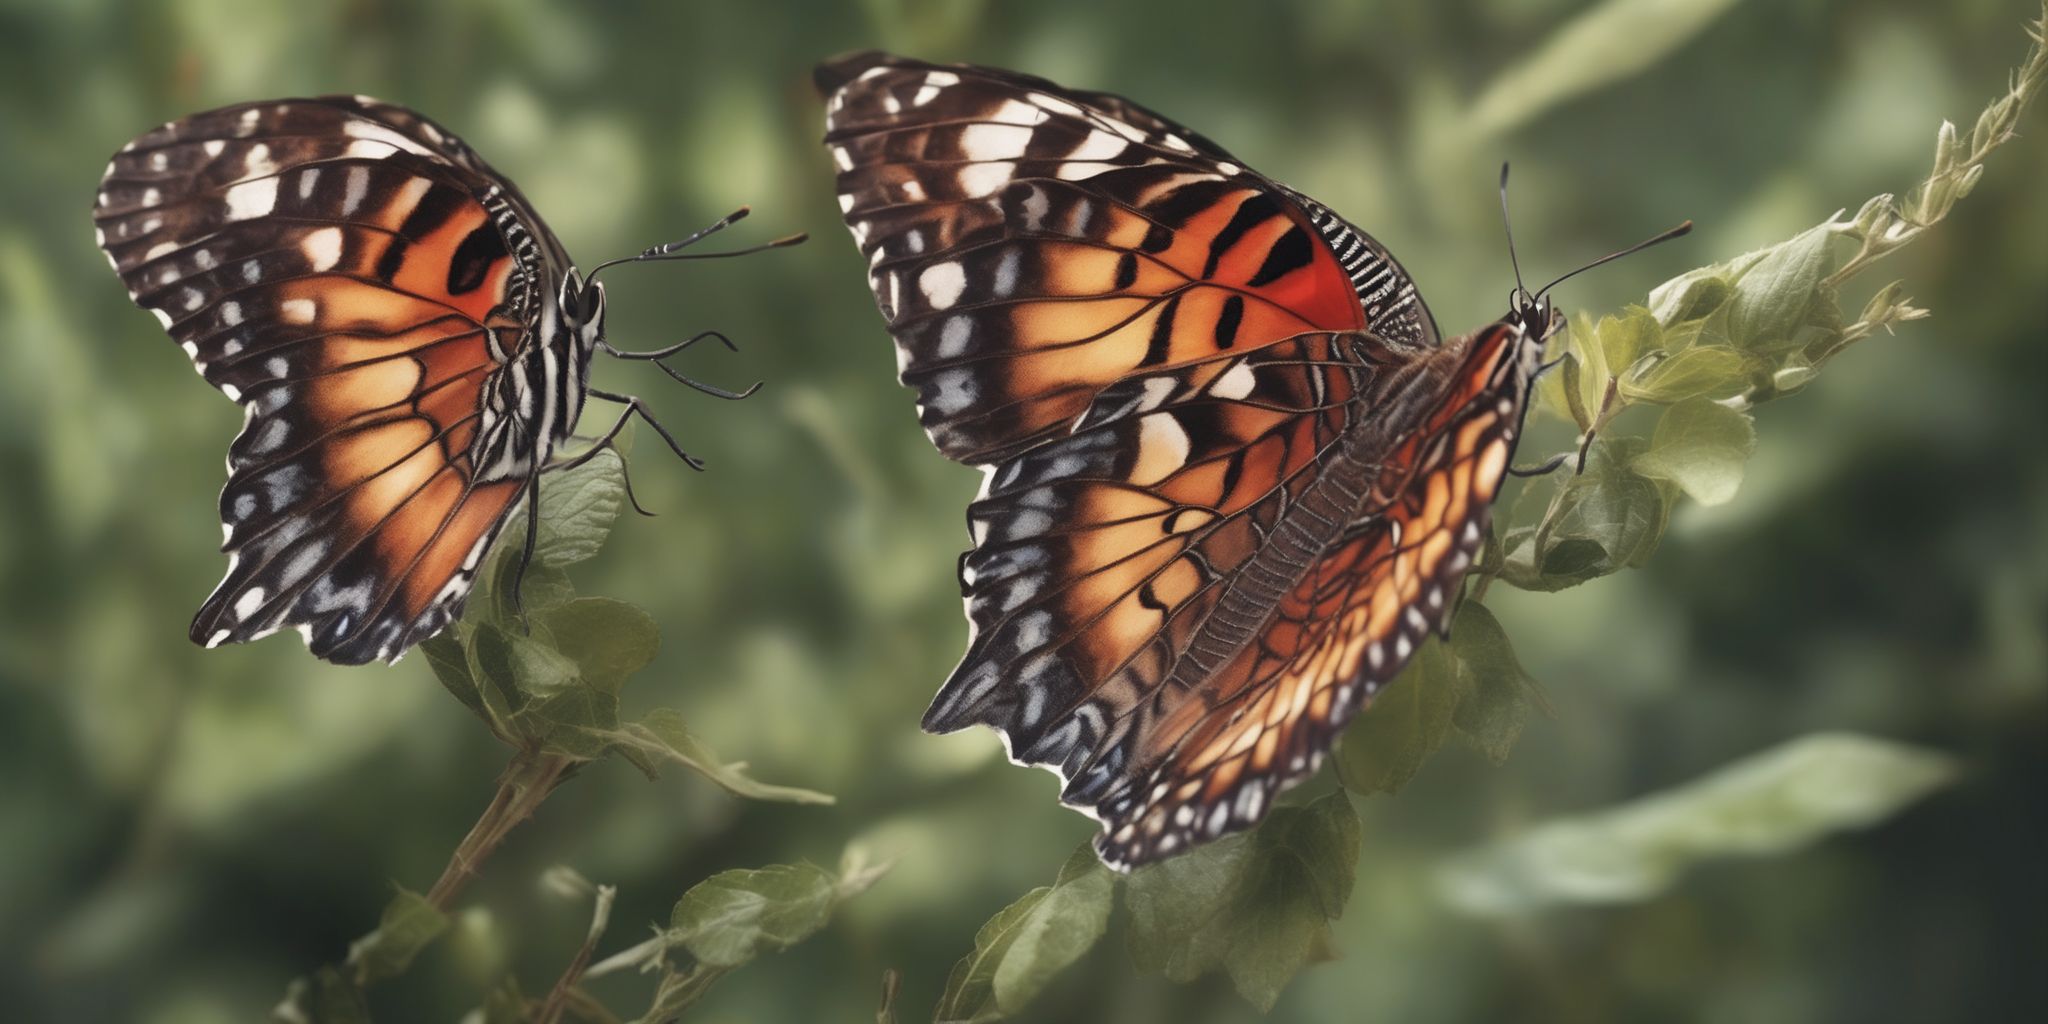 Butterfly  in realistic, photographic style